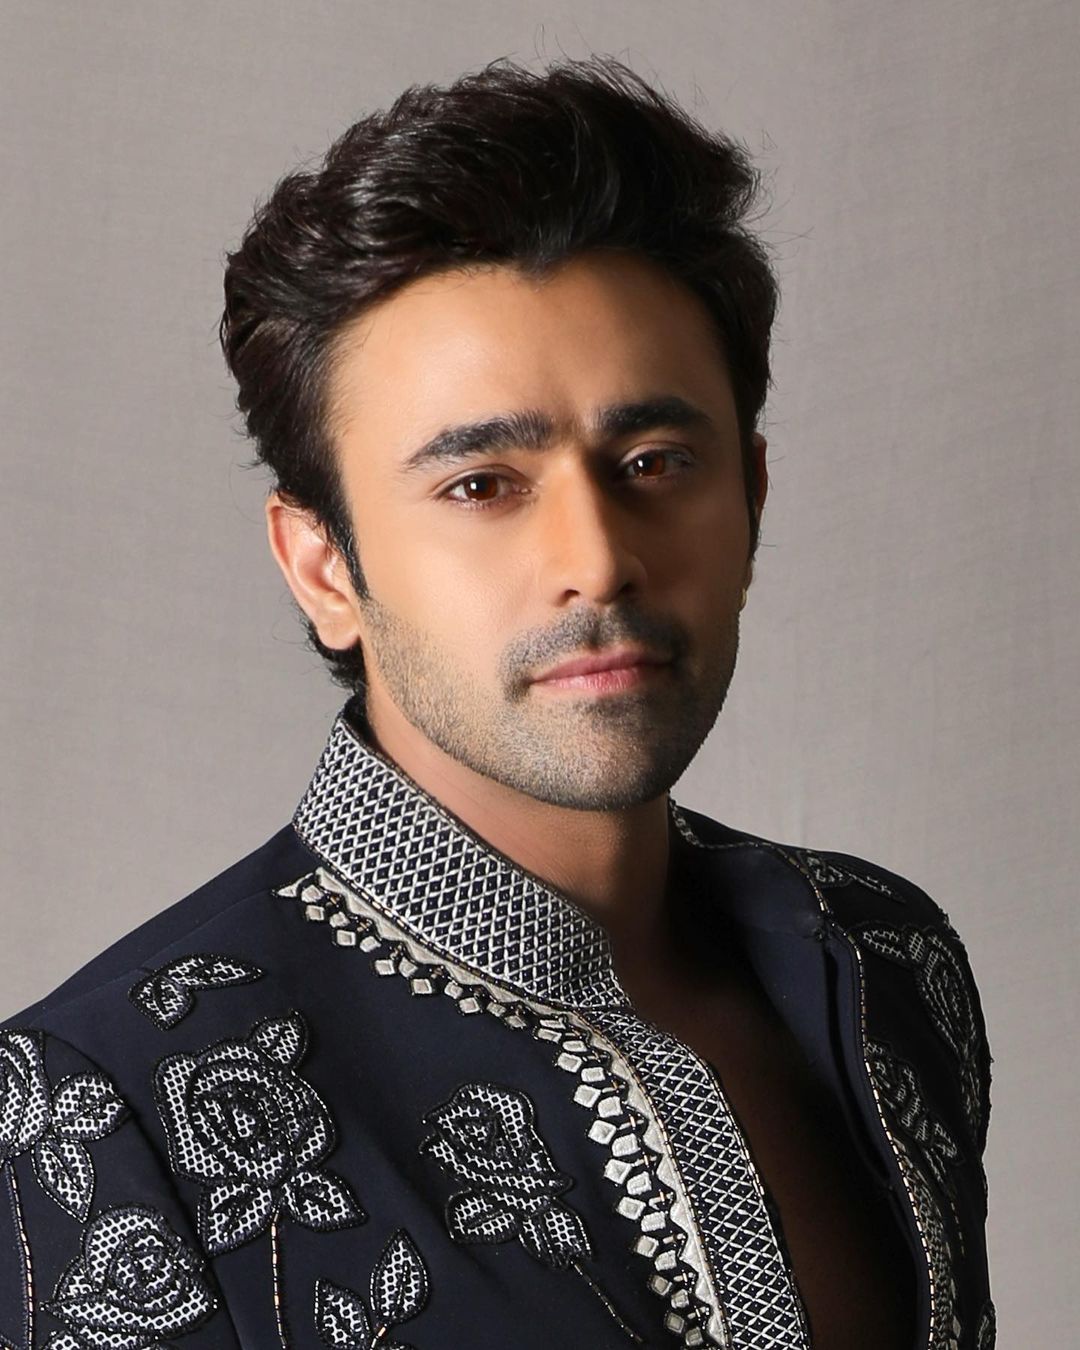 Pearl V Puri speaks about his jail term